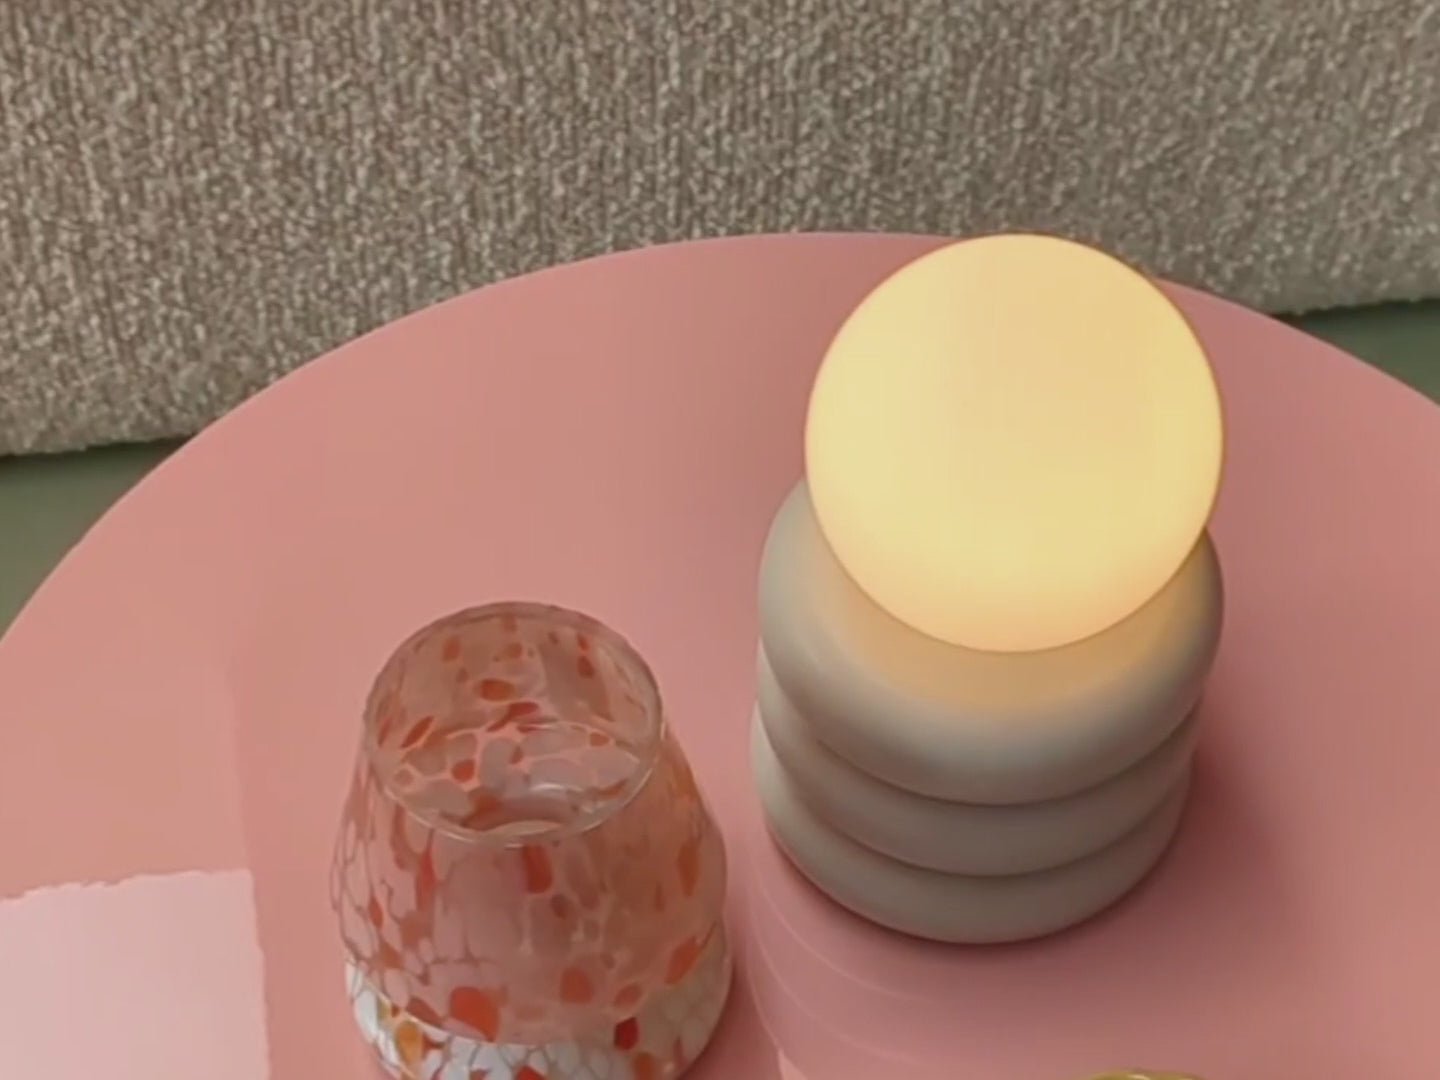 A cordless lamp consisting of three sand-coloured metal tubular discs supports an opal glass shade. The light sits on a pink table. The opal glass shade contains an integrated LED bulb that can be recharged. The lamp is portable and wireless.